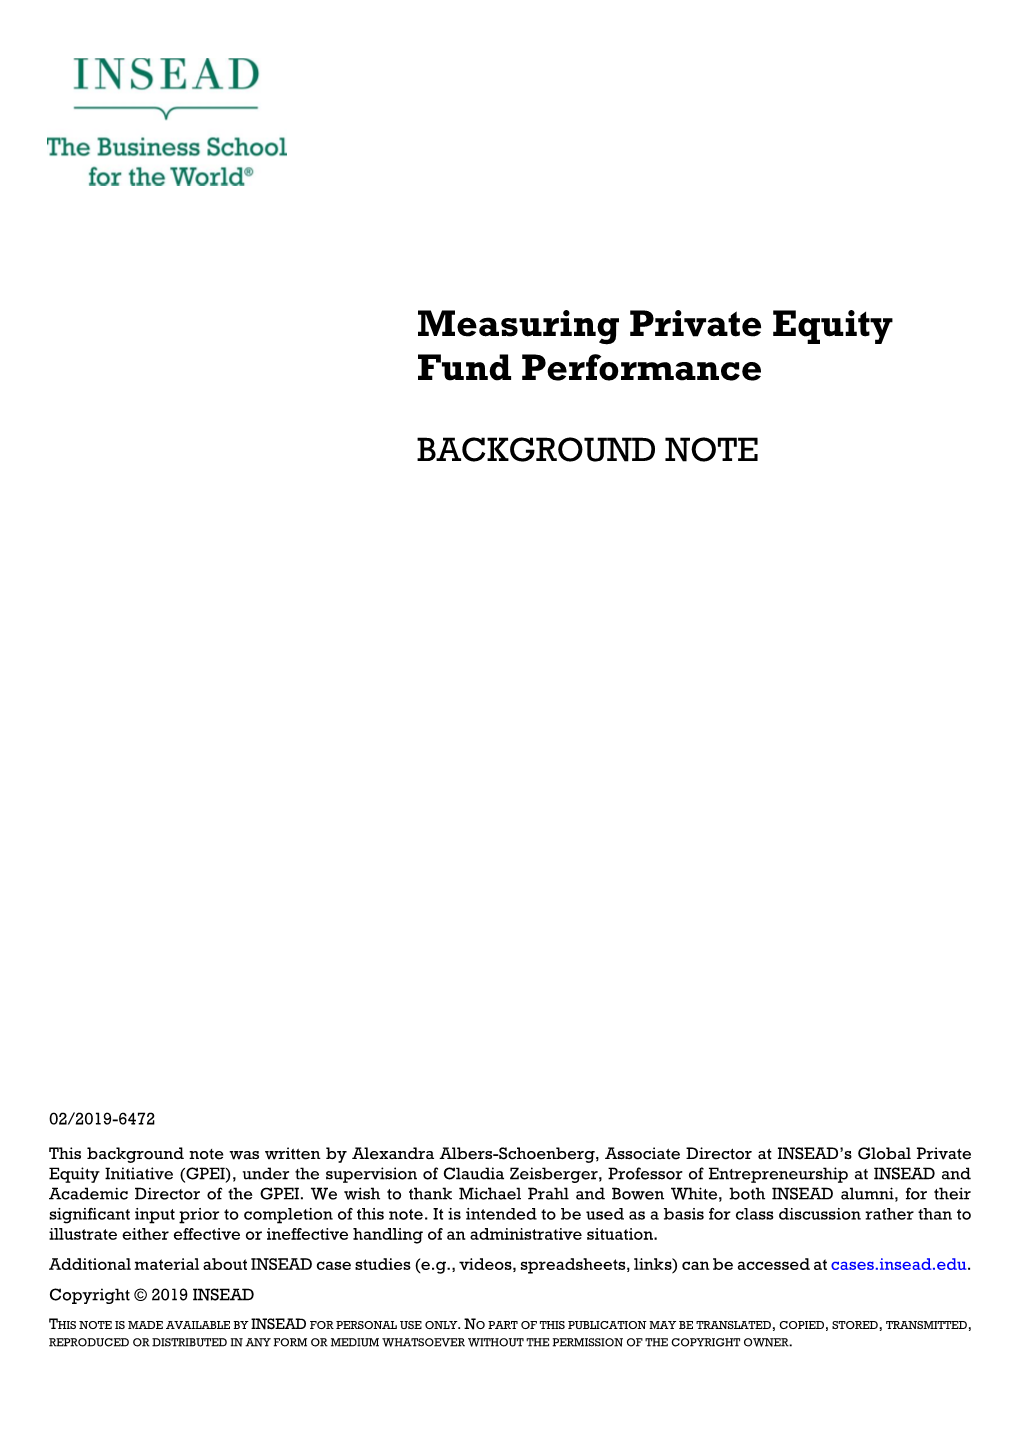 Measuring Private Equity Fund Performance